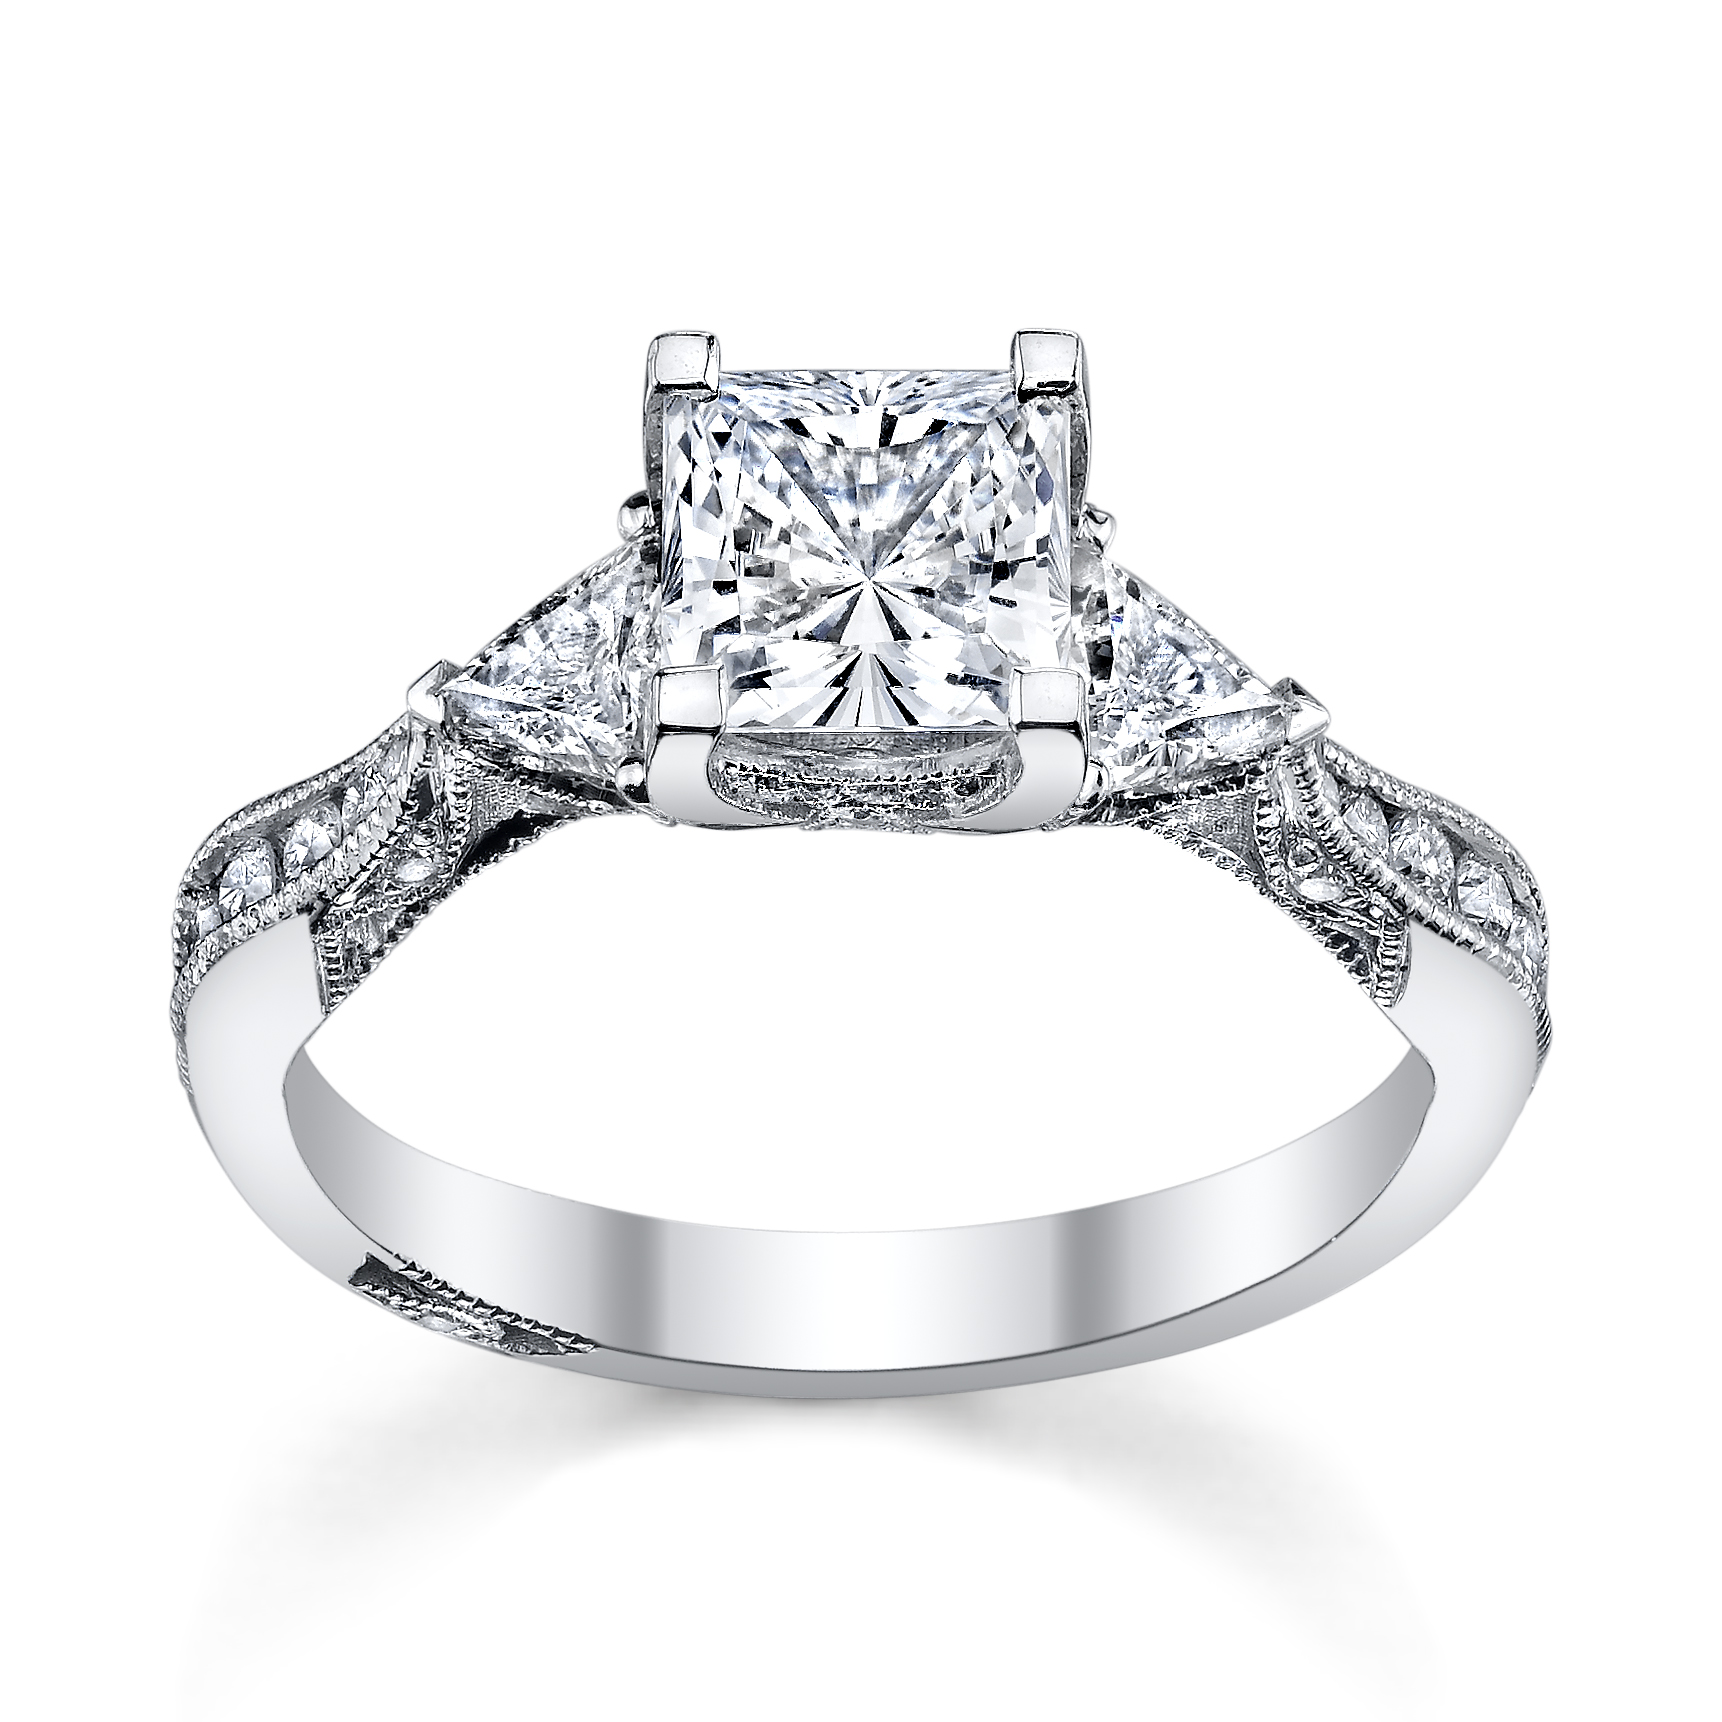 Tacori Princess Cut Engagement Ring with Trillion Cut Stones available ...